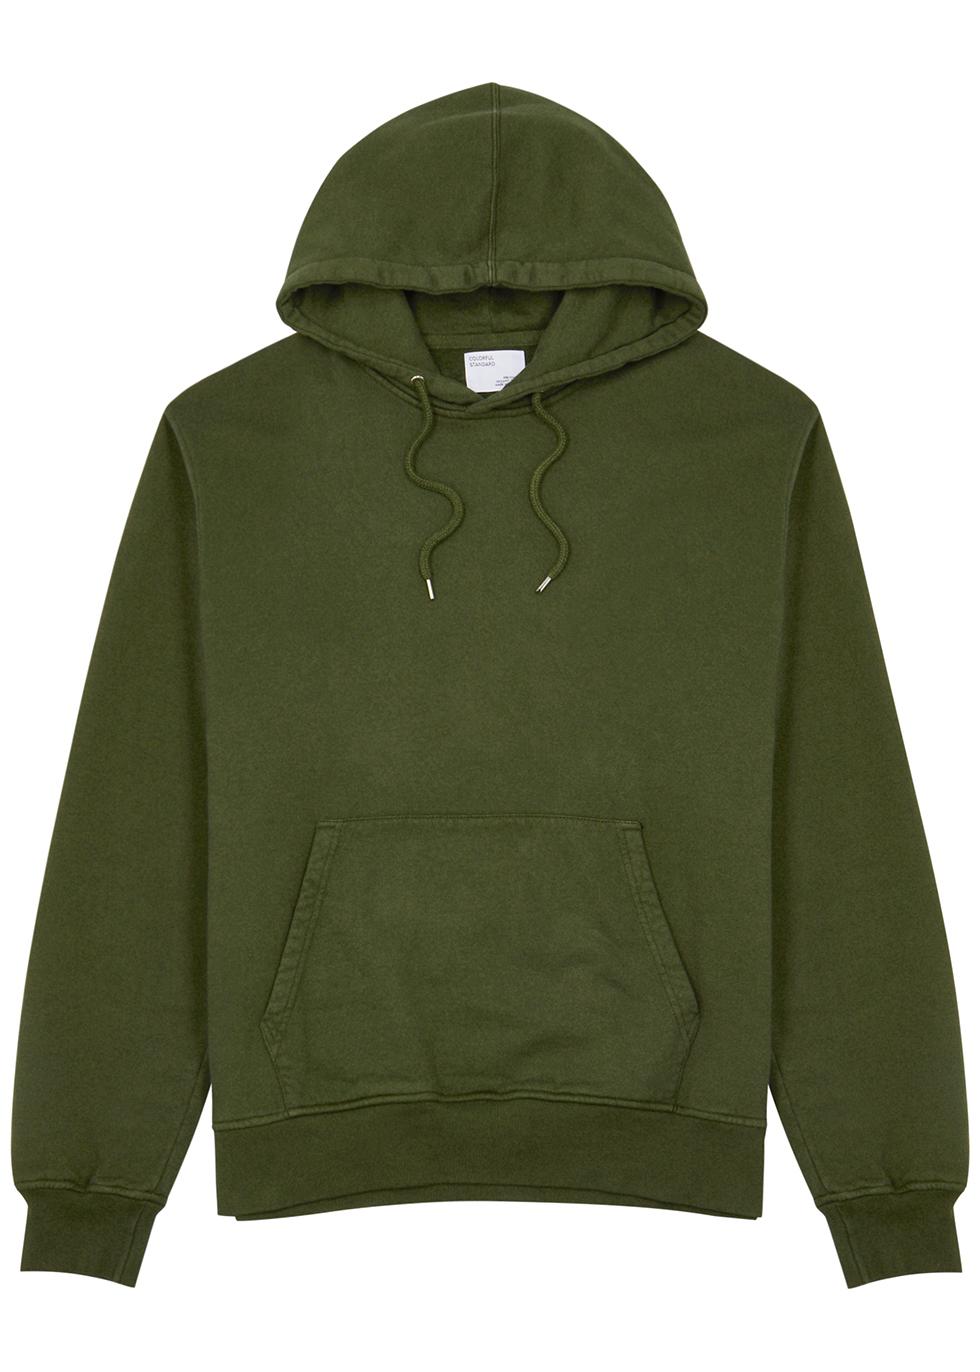 Green hoodied cotton sweatshirt by COLORFUL STANDARD